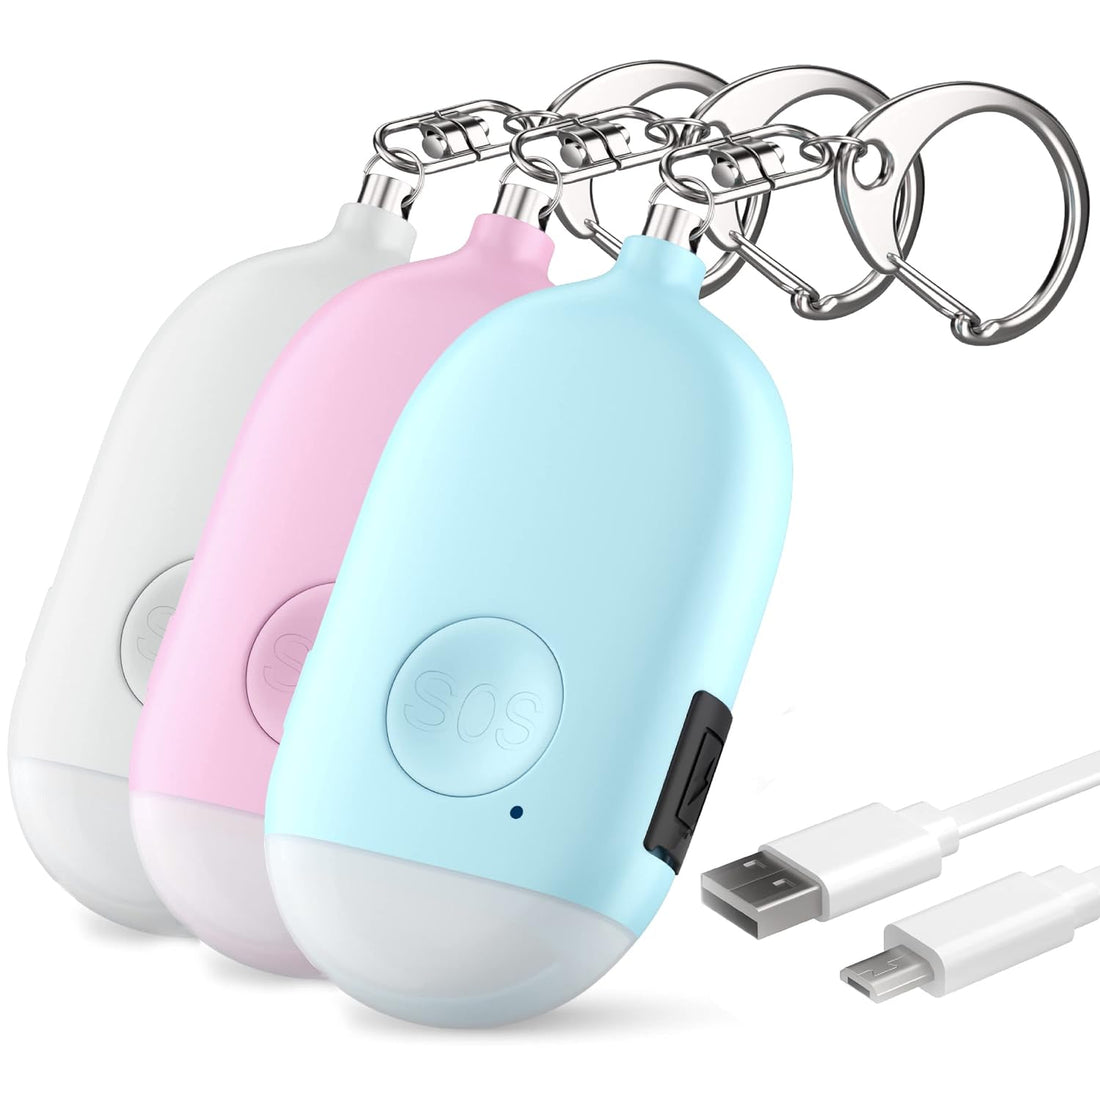 Rechargeable Self Defense Keychain Alarm – 3 Pack 130 dB Loud Emergency Personal Siren Ring with LED Light – SOS Safety Alert Device Key Chain for Women, Kids, and Elderly by WETEN (Pink&Blue&White)